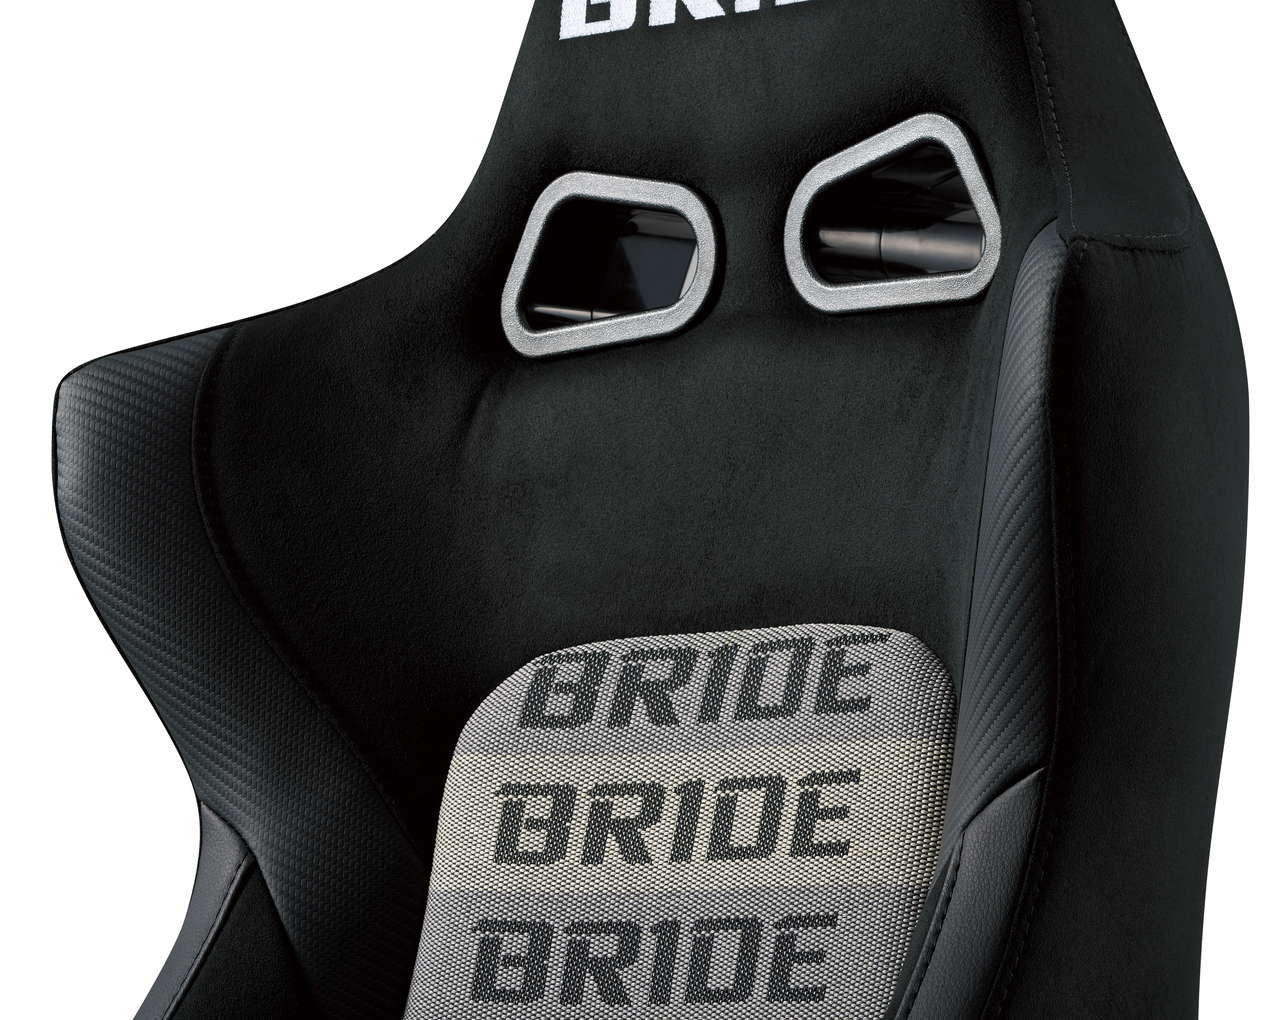 The skinnier sibling of the Euroster Bride Seats